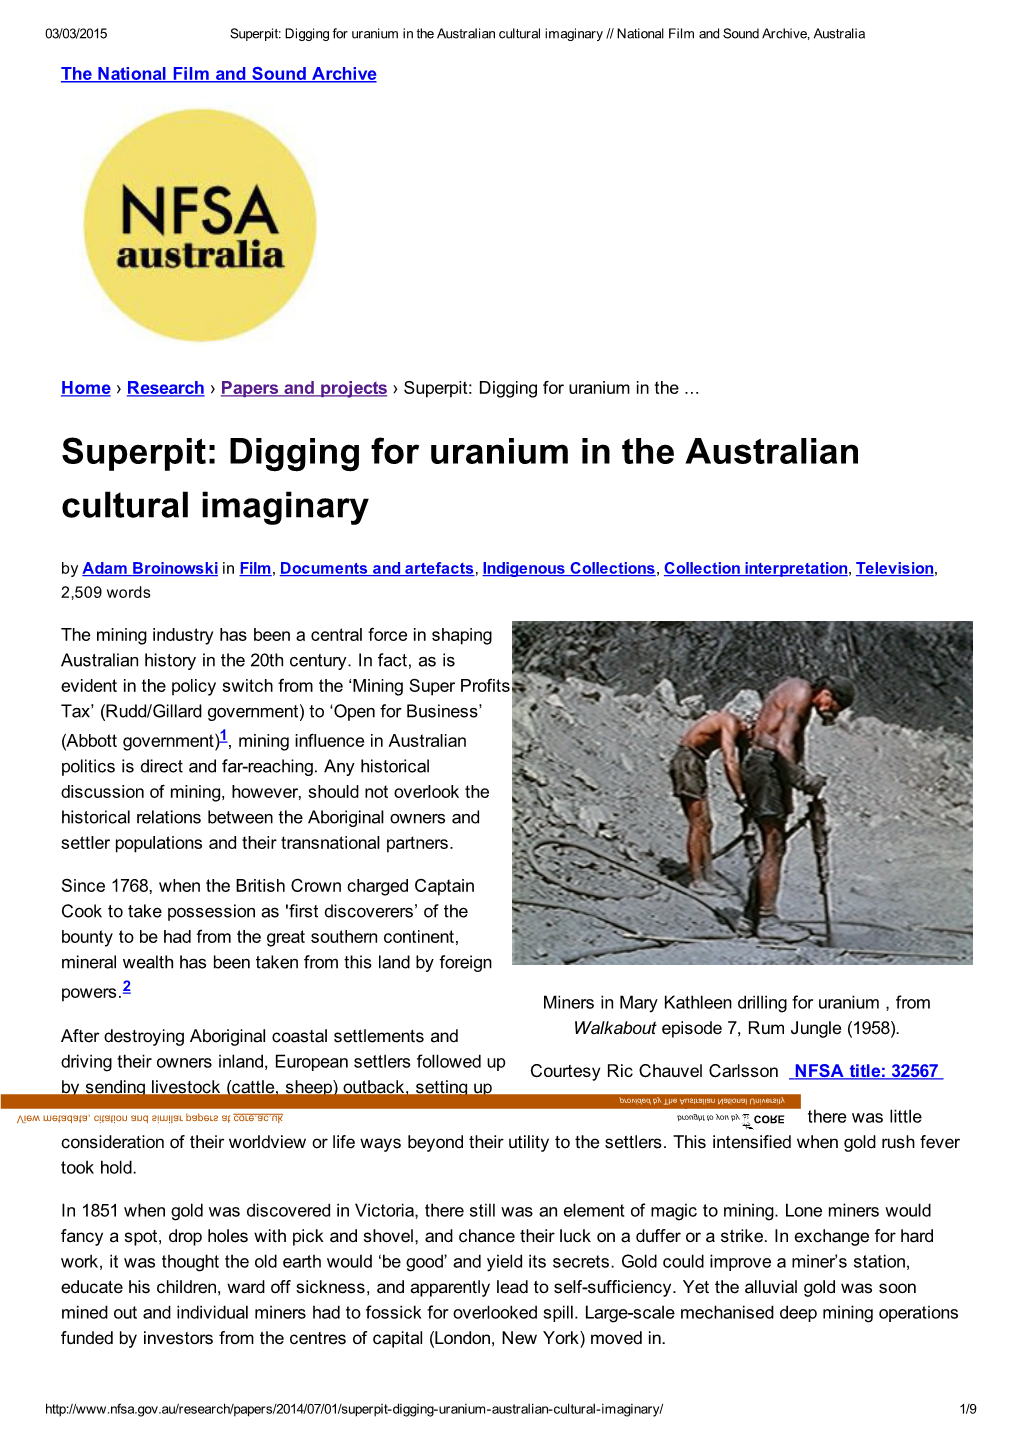 Superpit: Digging for Uranium in the Australian Cultural Imaginary // National Film and Sound Archive, Australia